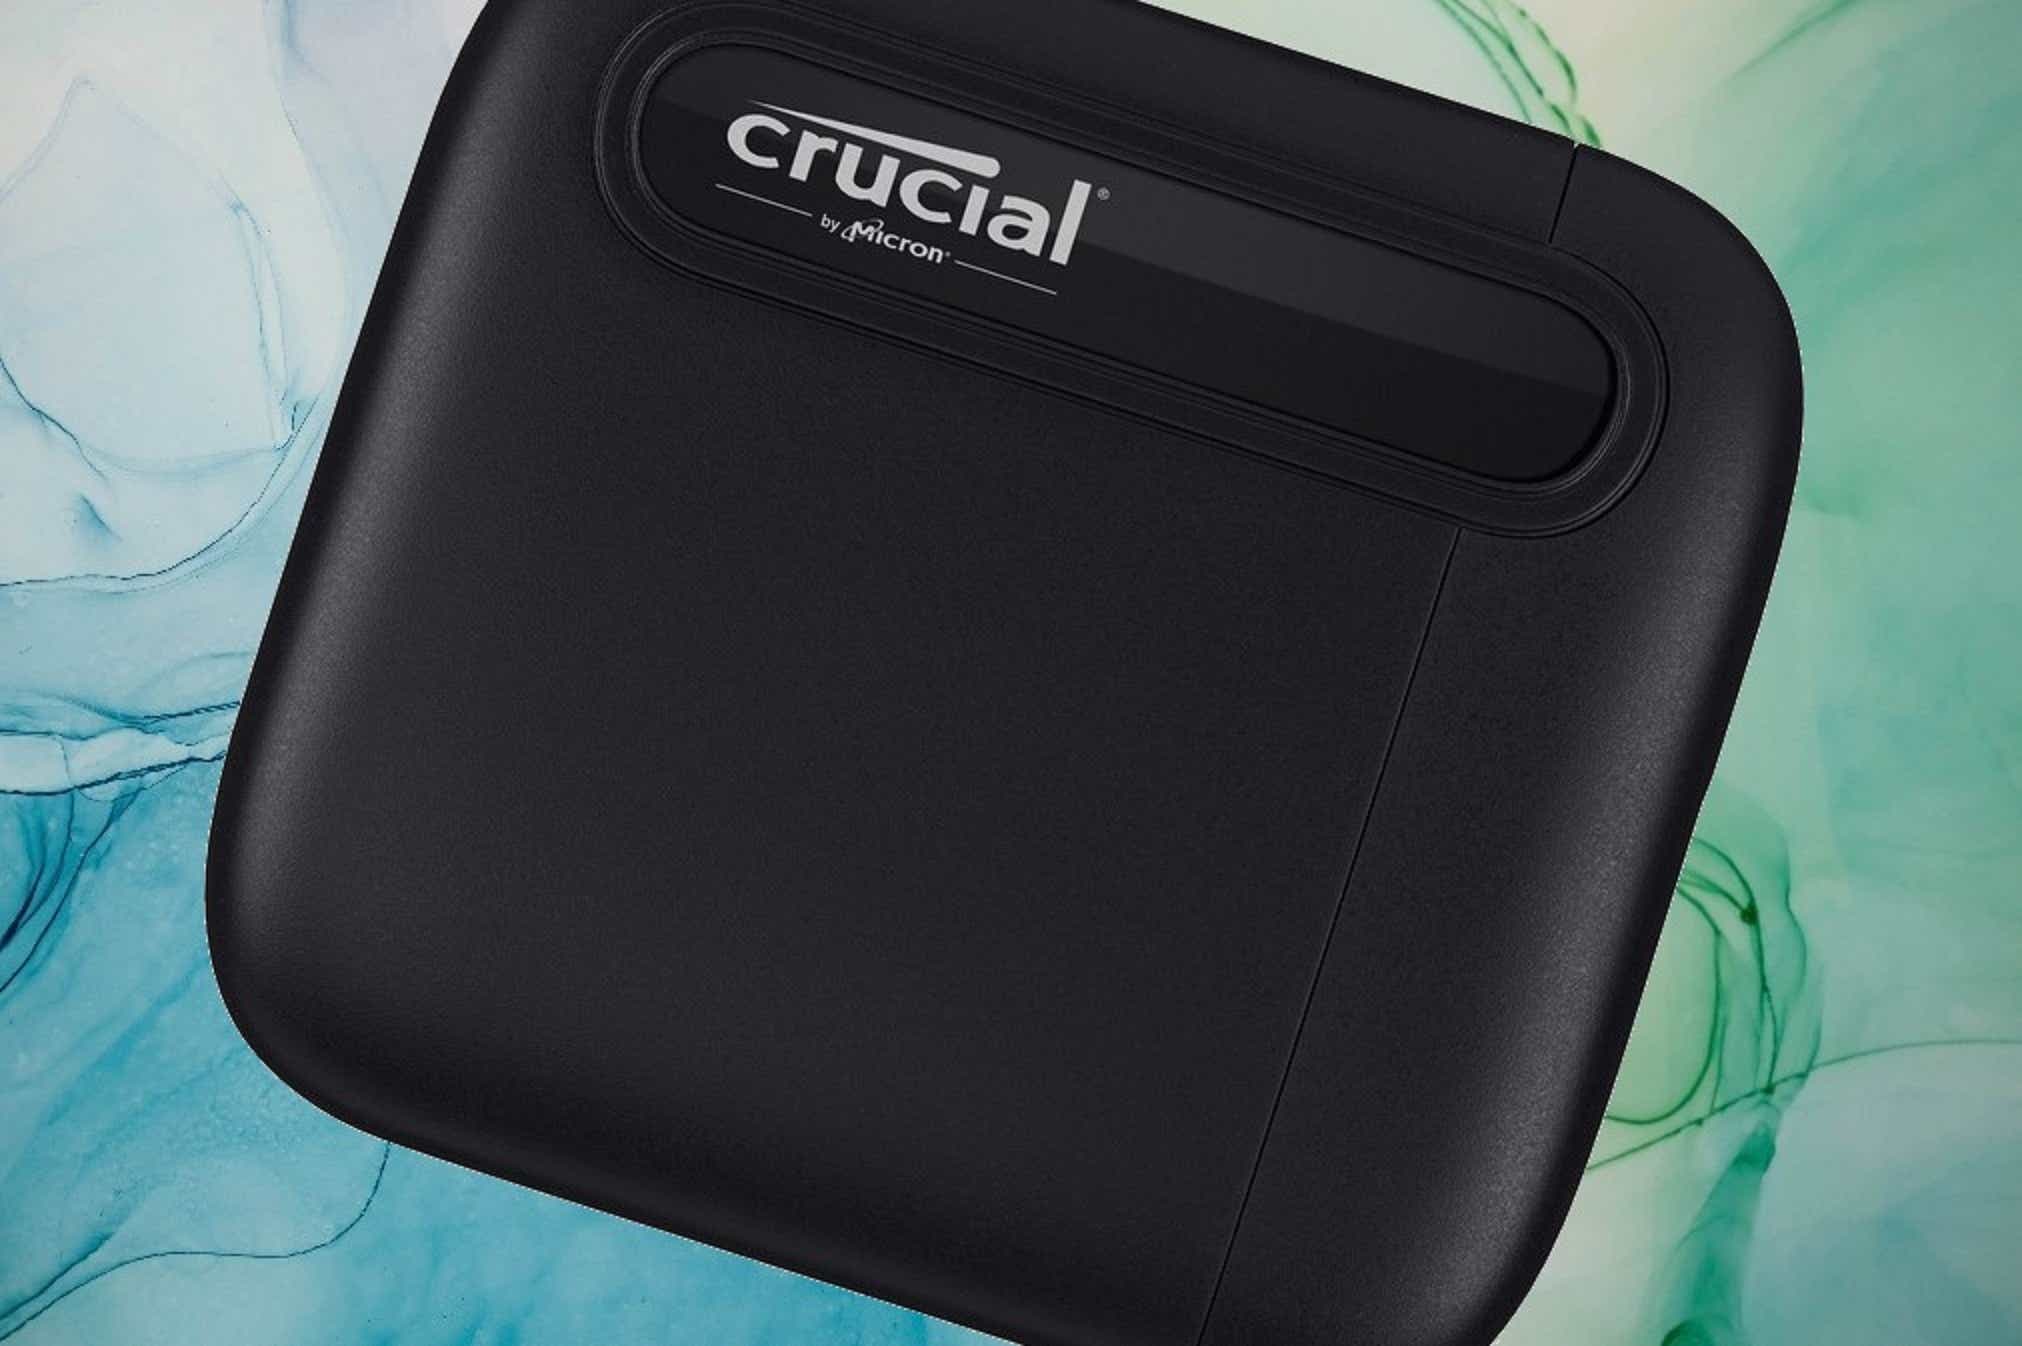 Crucial X6 Portable SSD (2TB) - Best budget external SSD for gaming